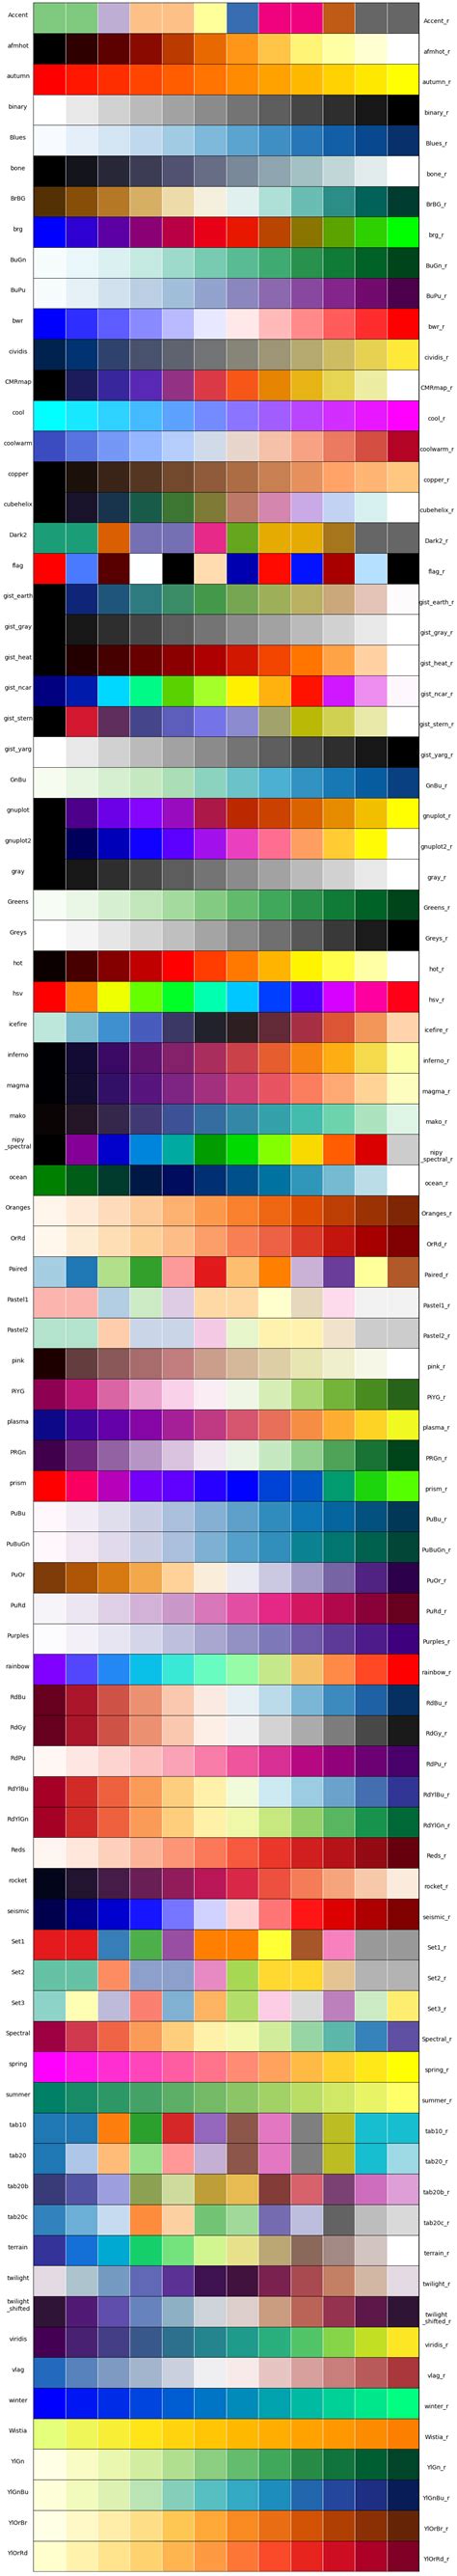 seaborn color palettes    dont   search